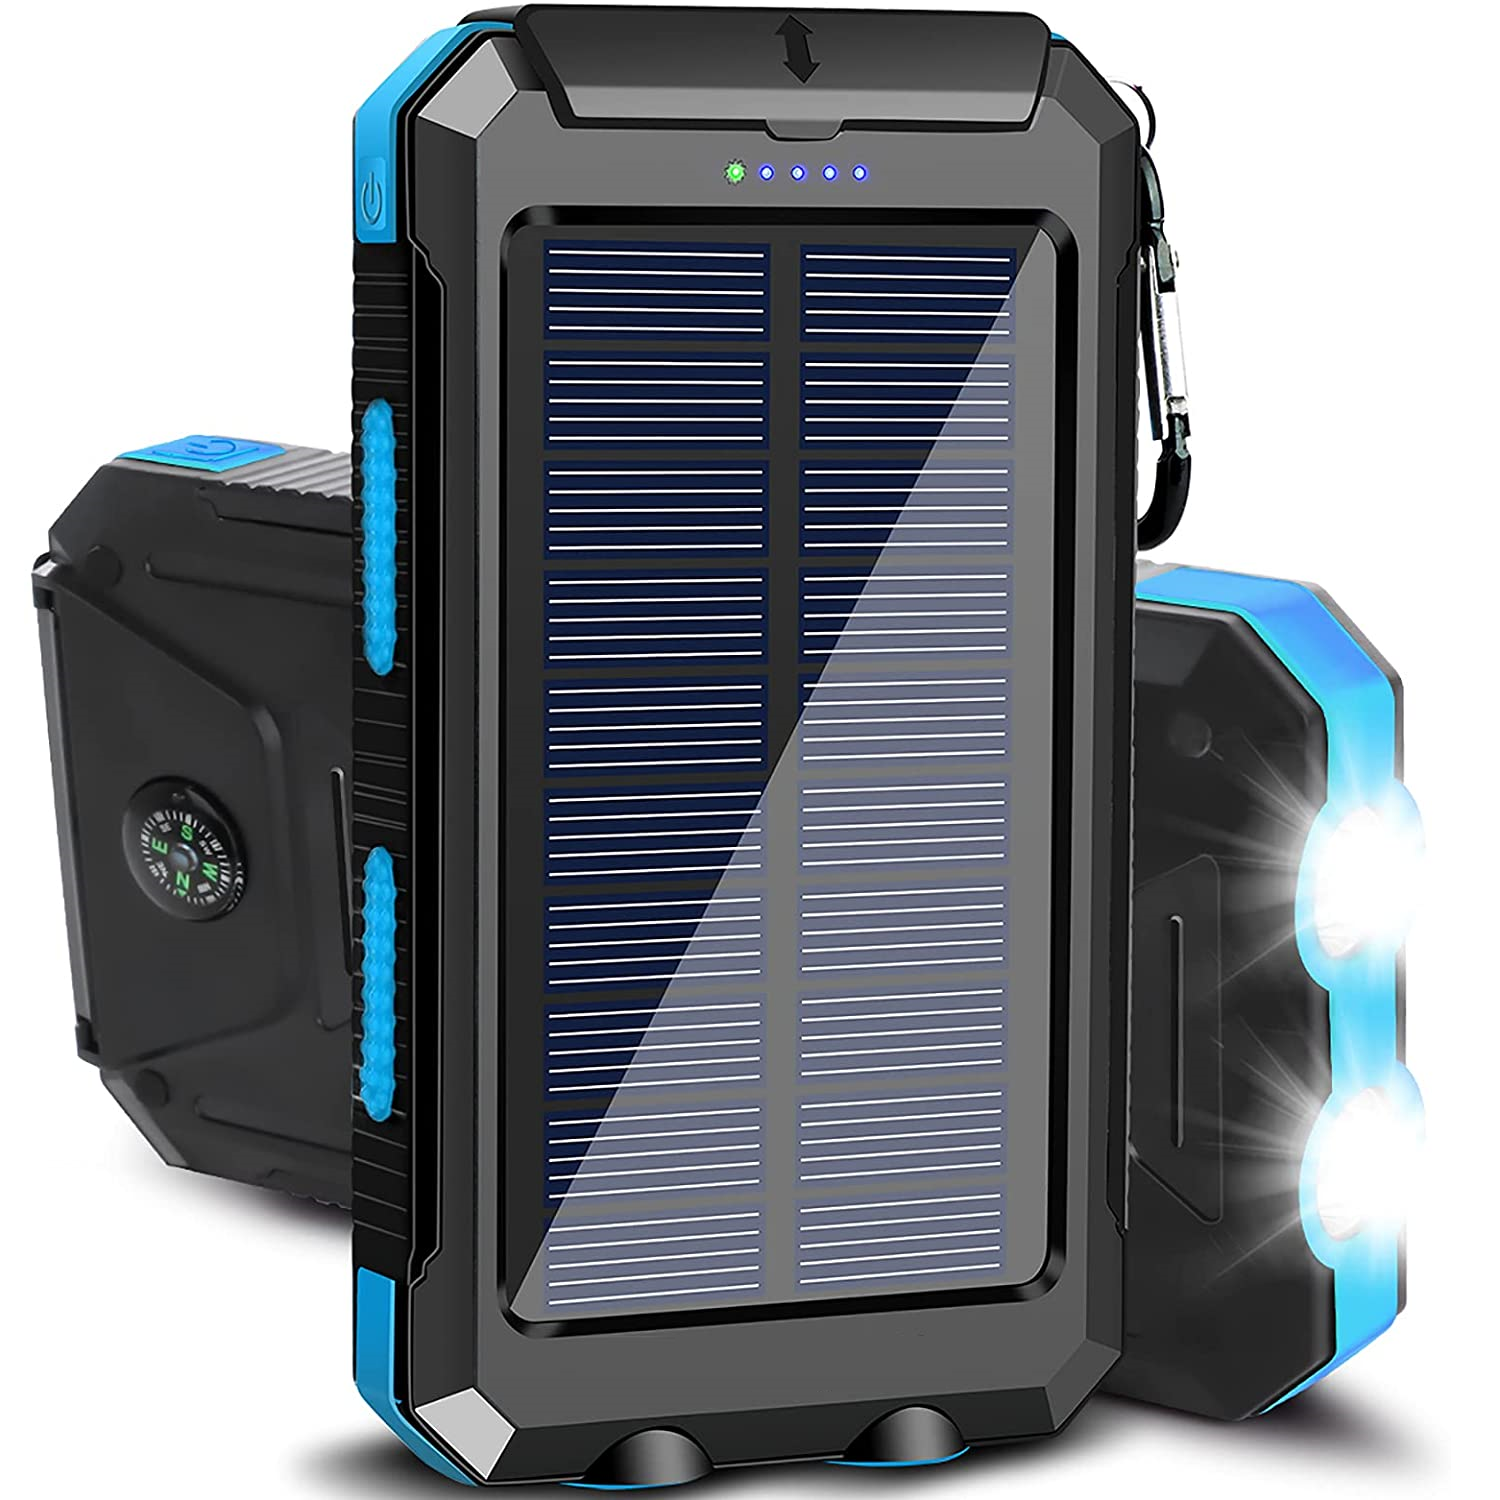 ISTAR Solar Power Bank, 20000mAh Portable Solar Charger, Waterproof Backup Battery Pack with Dual USB 5V Outputs/LED Flashlights and Compass for Cellphones, Tablets and Electronic Devices(Blue)